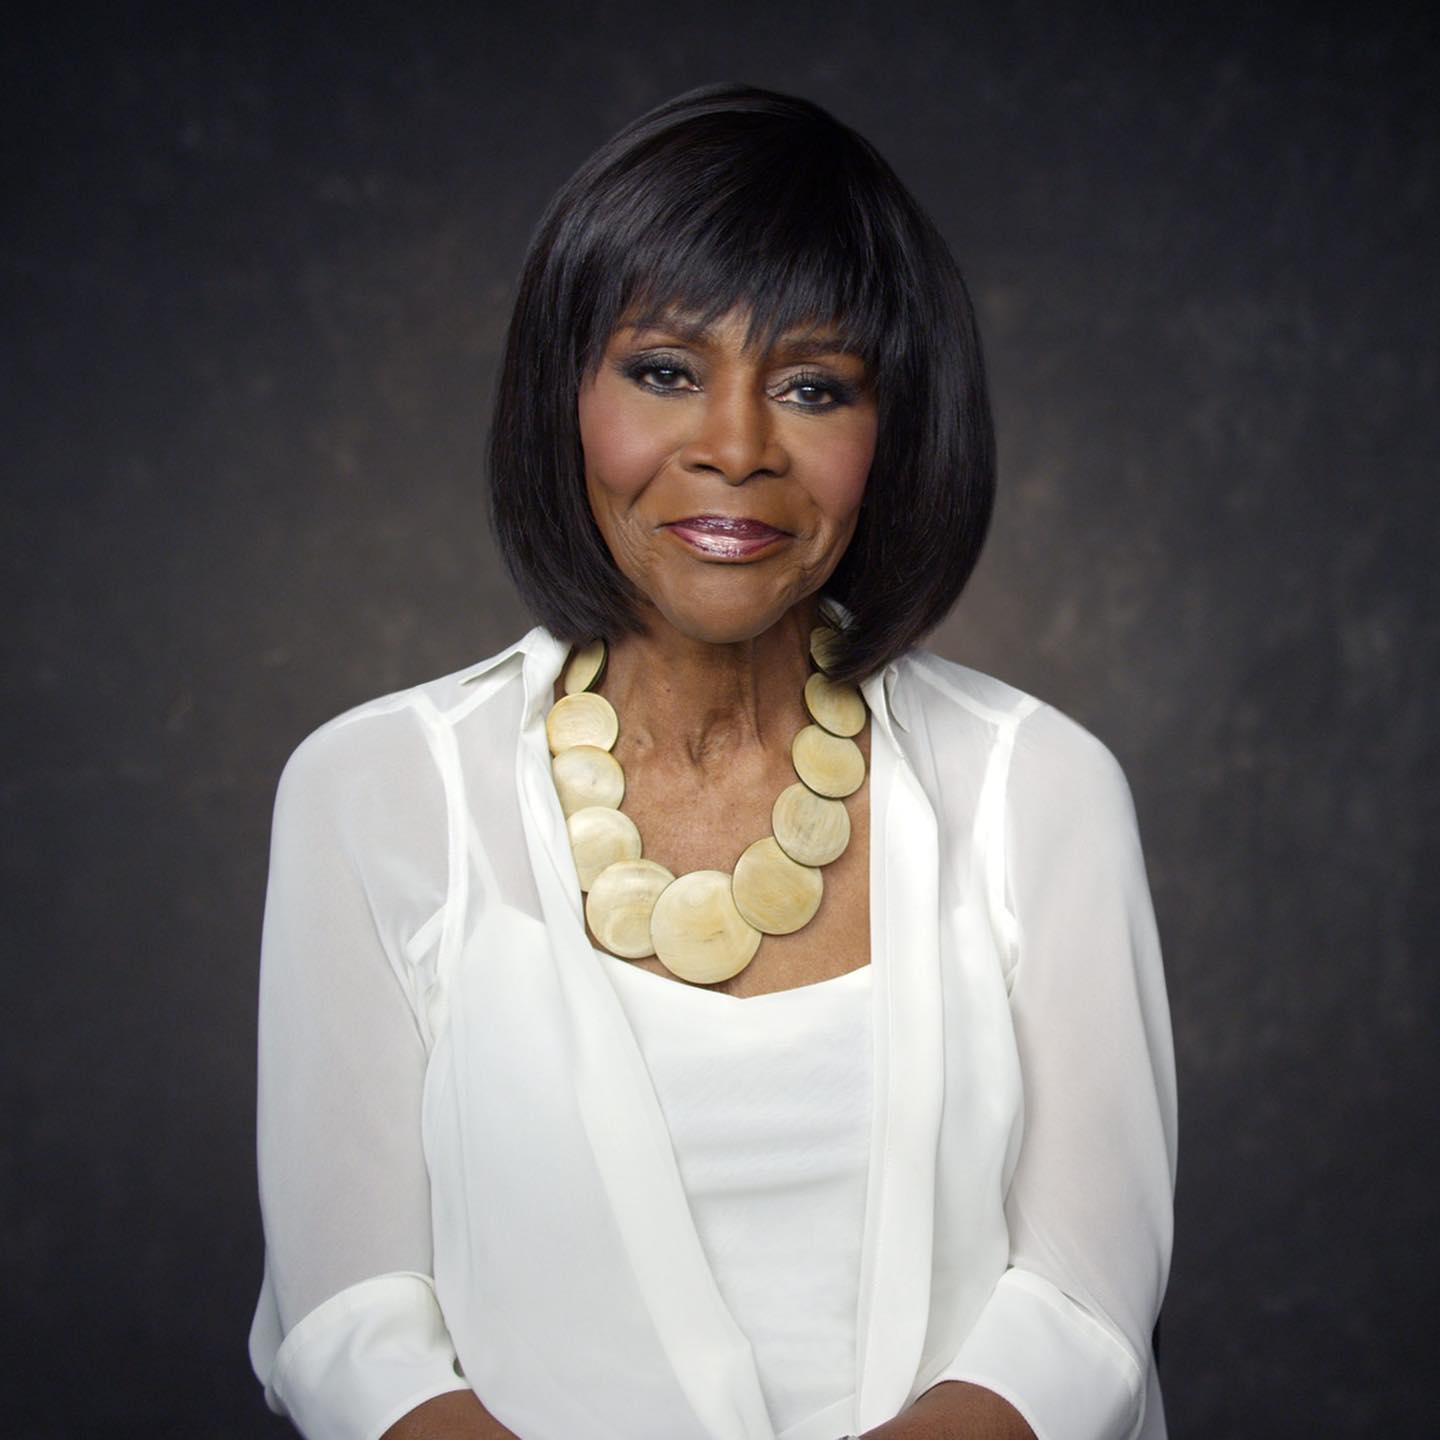 Hollywood Mourns The Death Of Legendary Actress Cicely Tyson-iHarare